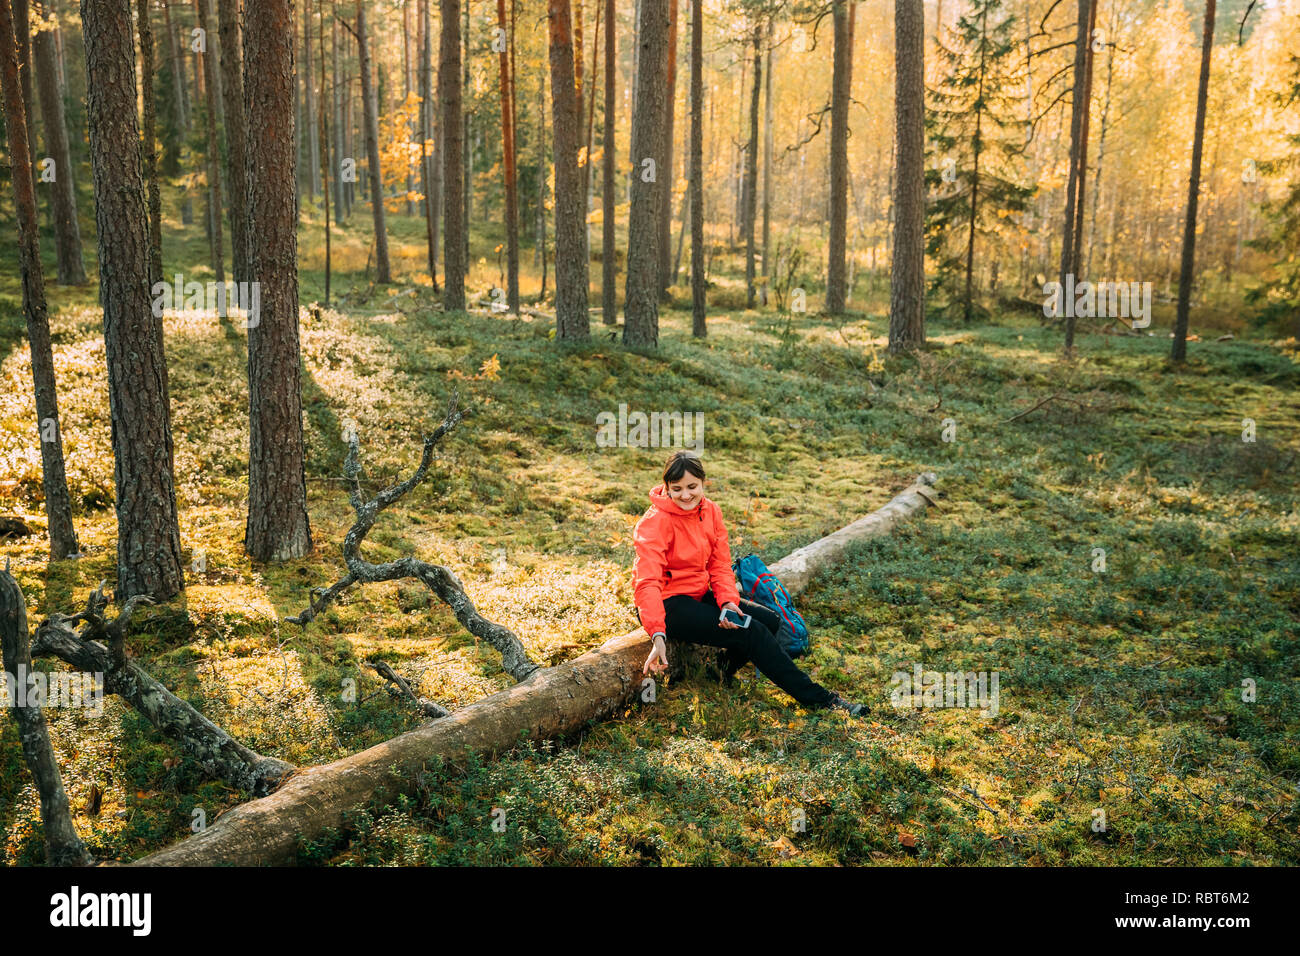 Active Young Adult Beautiful Caucasian Girl Woman Dressed In Red Jacket Resting Sitting On Fallen Tree And Using Smartphone In Autumn Sunset Green For Stock Photo